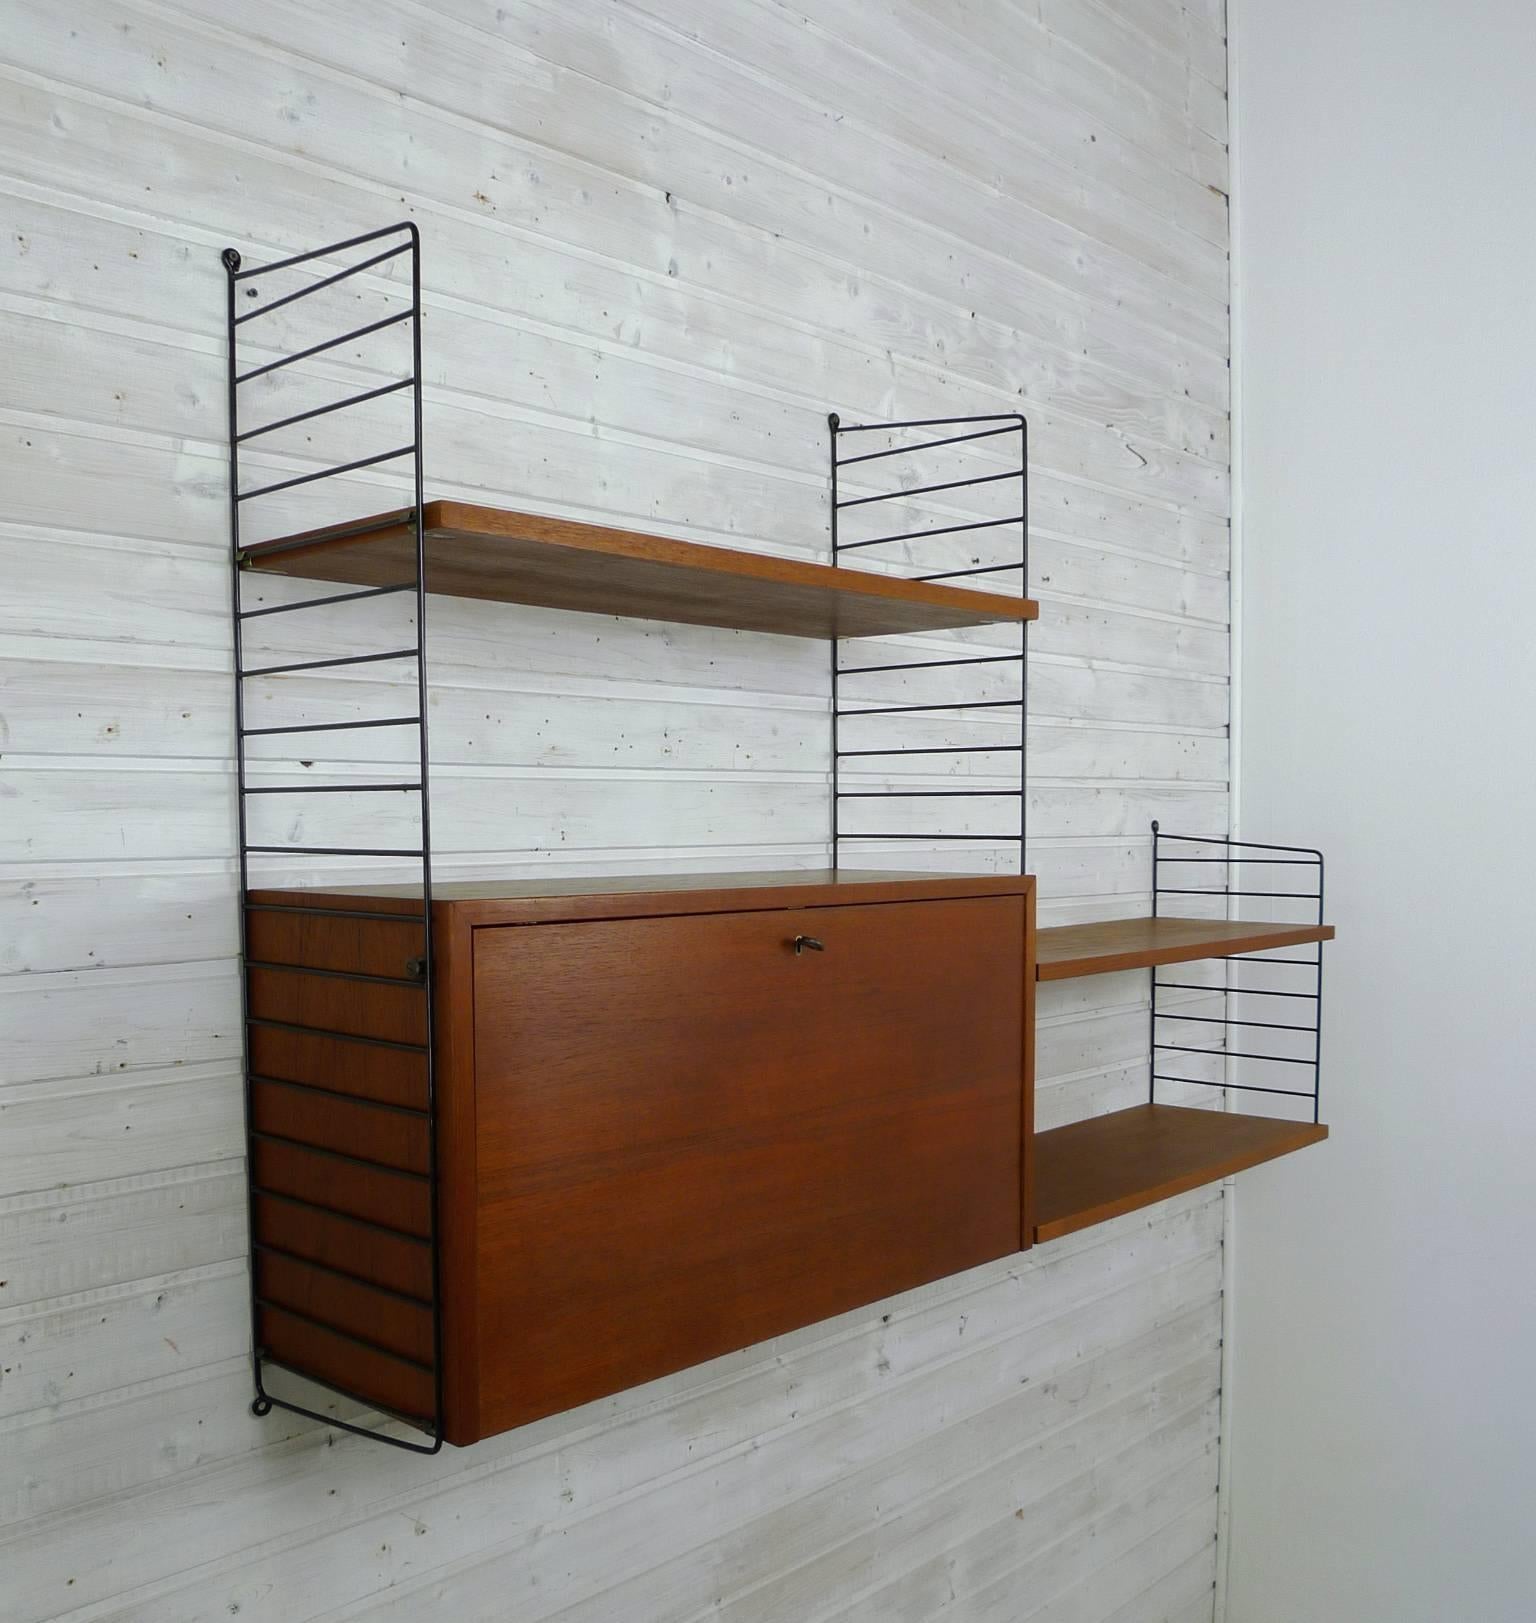 Scandinavian Modern Swedish Wall Unit with Teak Box and Shelves by Nisse Strinning for String, 1950s For Sale